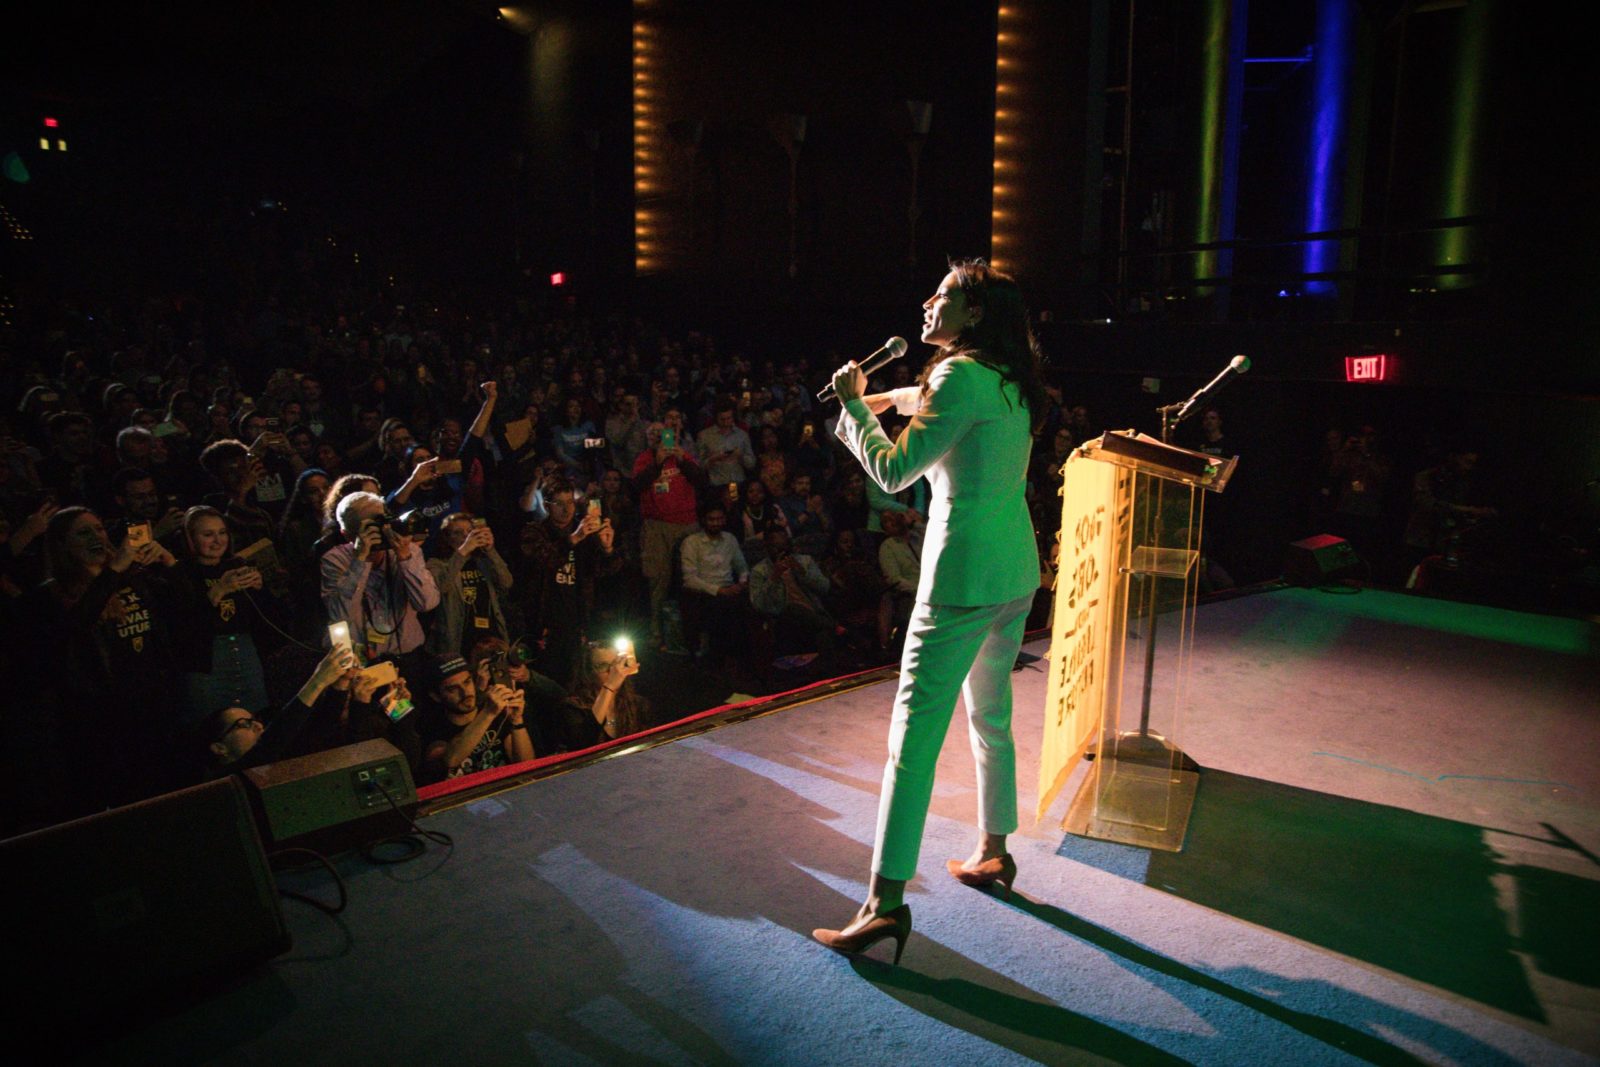 AOC facing away from addressing the crowd during the GND tour